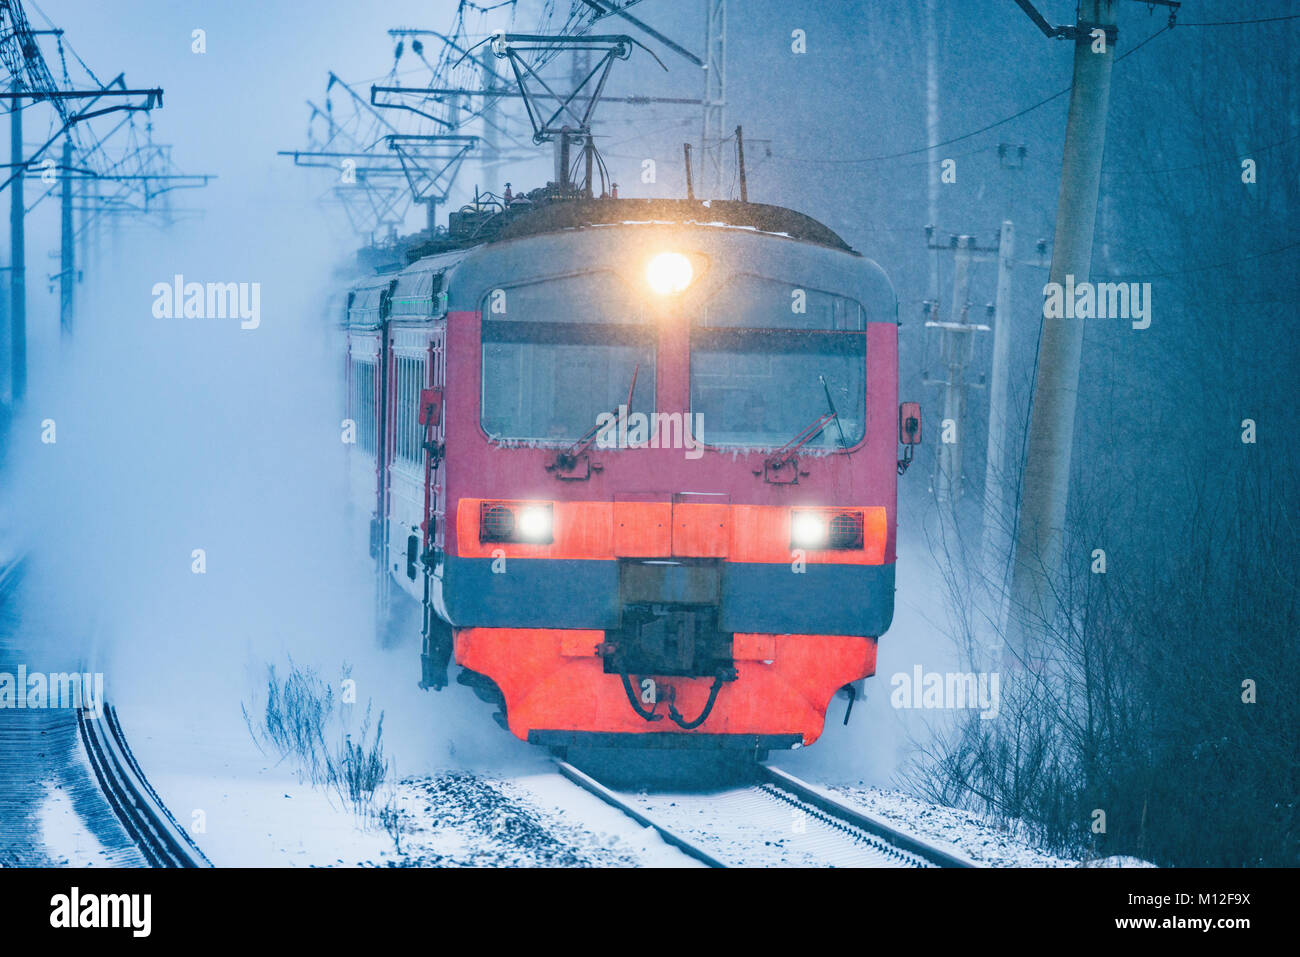 Highspeed train approaches to the station platform at snowstormy evening time. Stock Photo